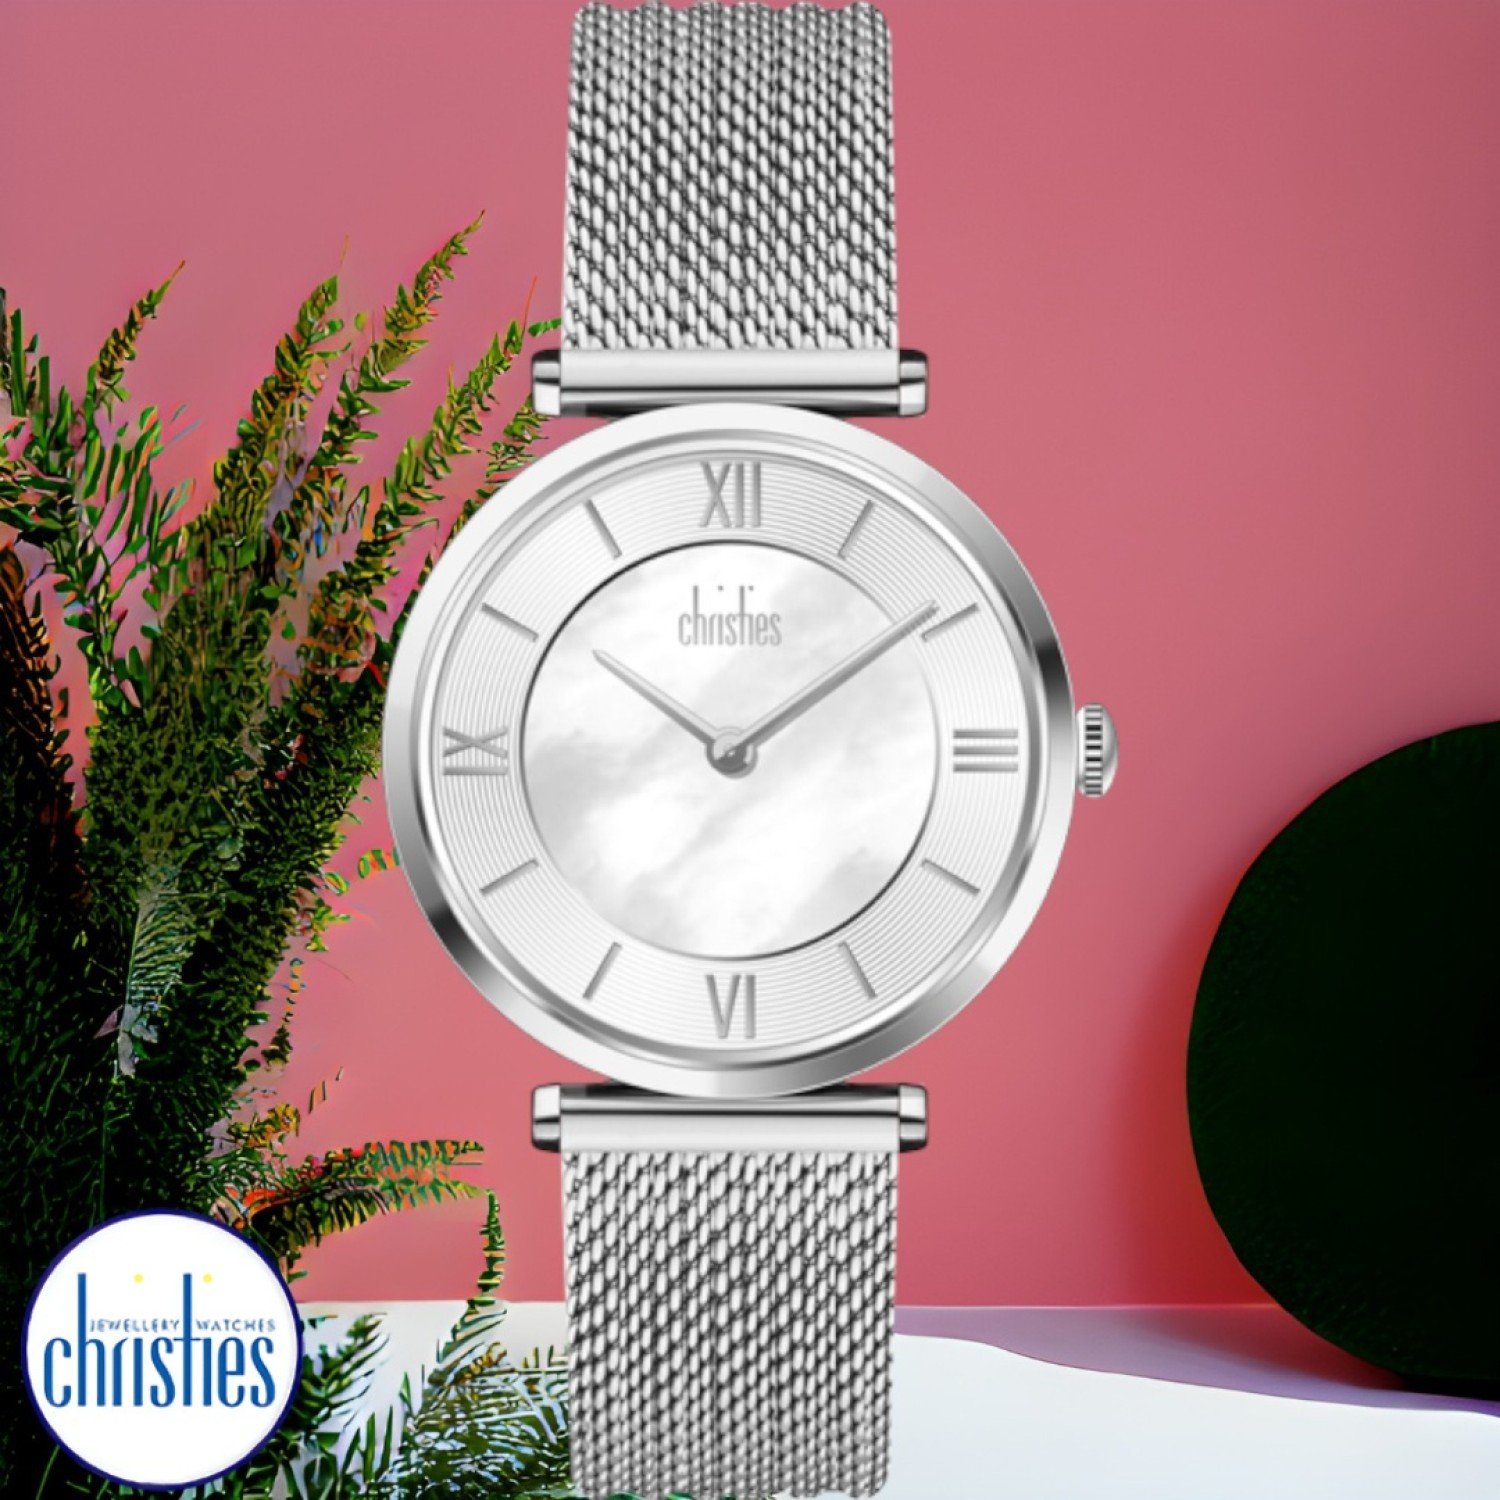 AW458-V1 Christies Luxe  Mesh Strap Watch AW458-V1 Christies Jewellery NZ- Christies Jewellery Online and Auckland - Free Delivery - Afterpay, Laybuy and Zip  the easy way to pay